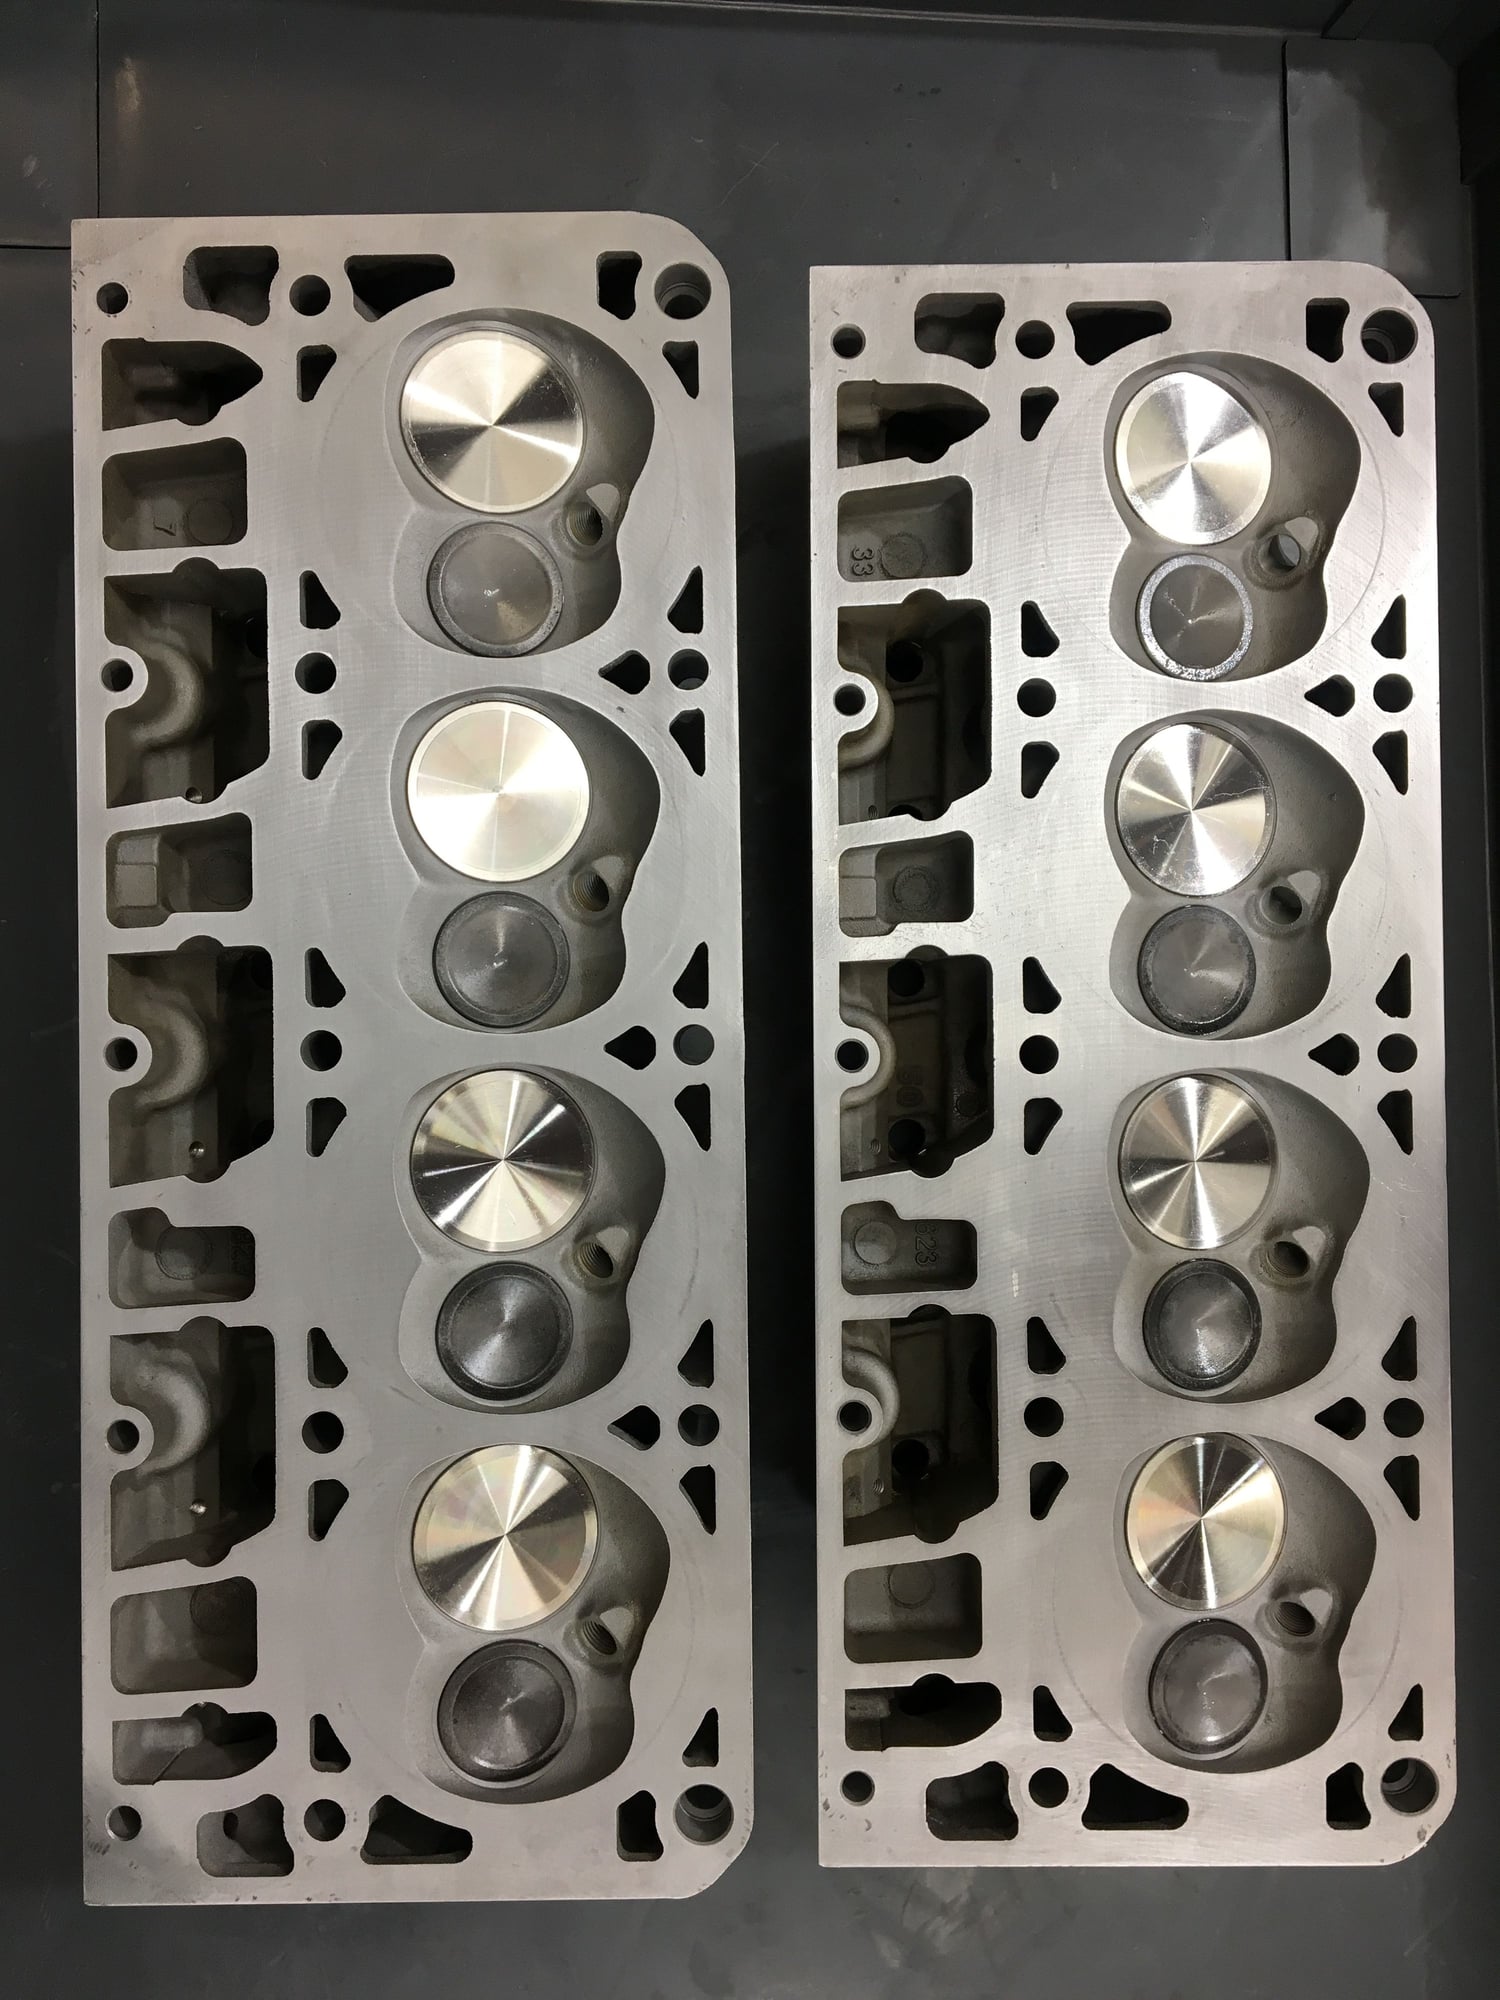  - Ls3 L92 heads fresh from machine shop with .625 springs - Houston, TX 77065, United States